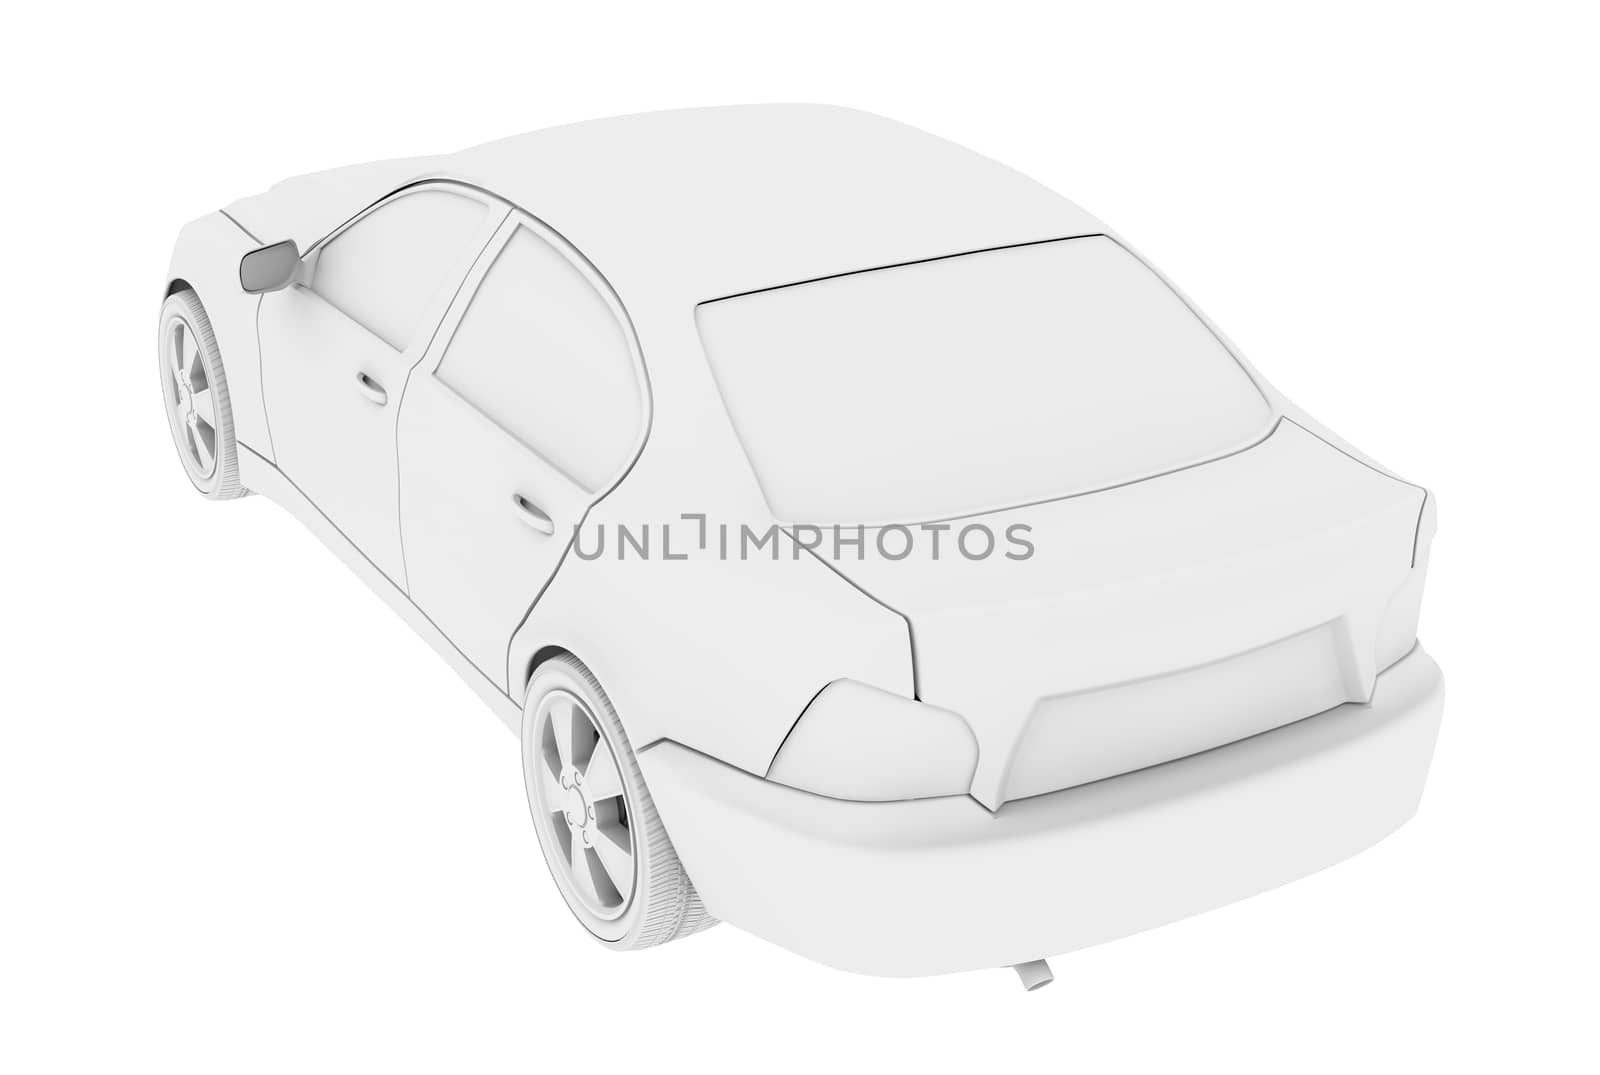 Car model on isolated white background, back view